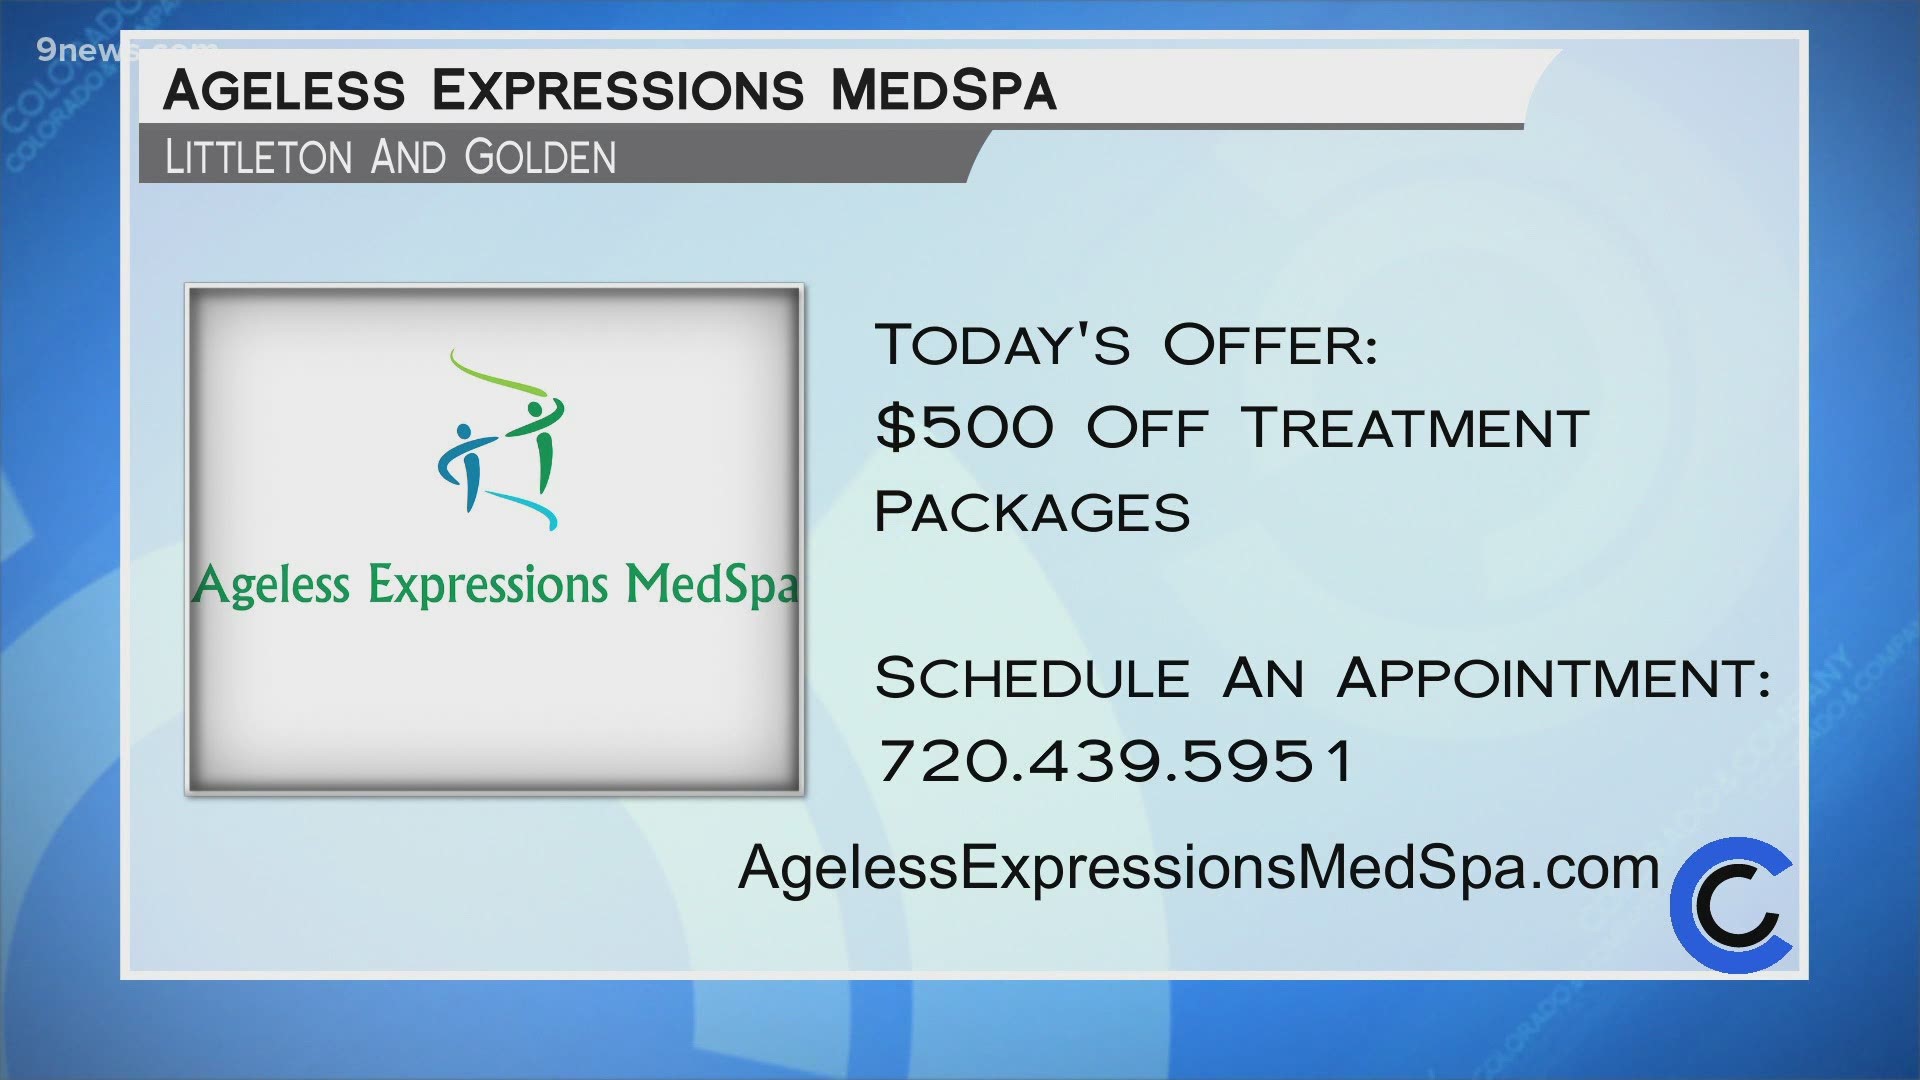 Learn more about the treatments that can help you get your life back at AgelessExpressionsMedspa.com. You can also call 720.439.5951.